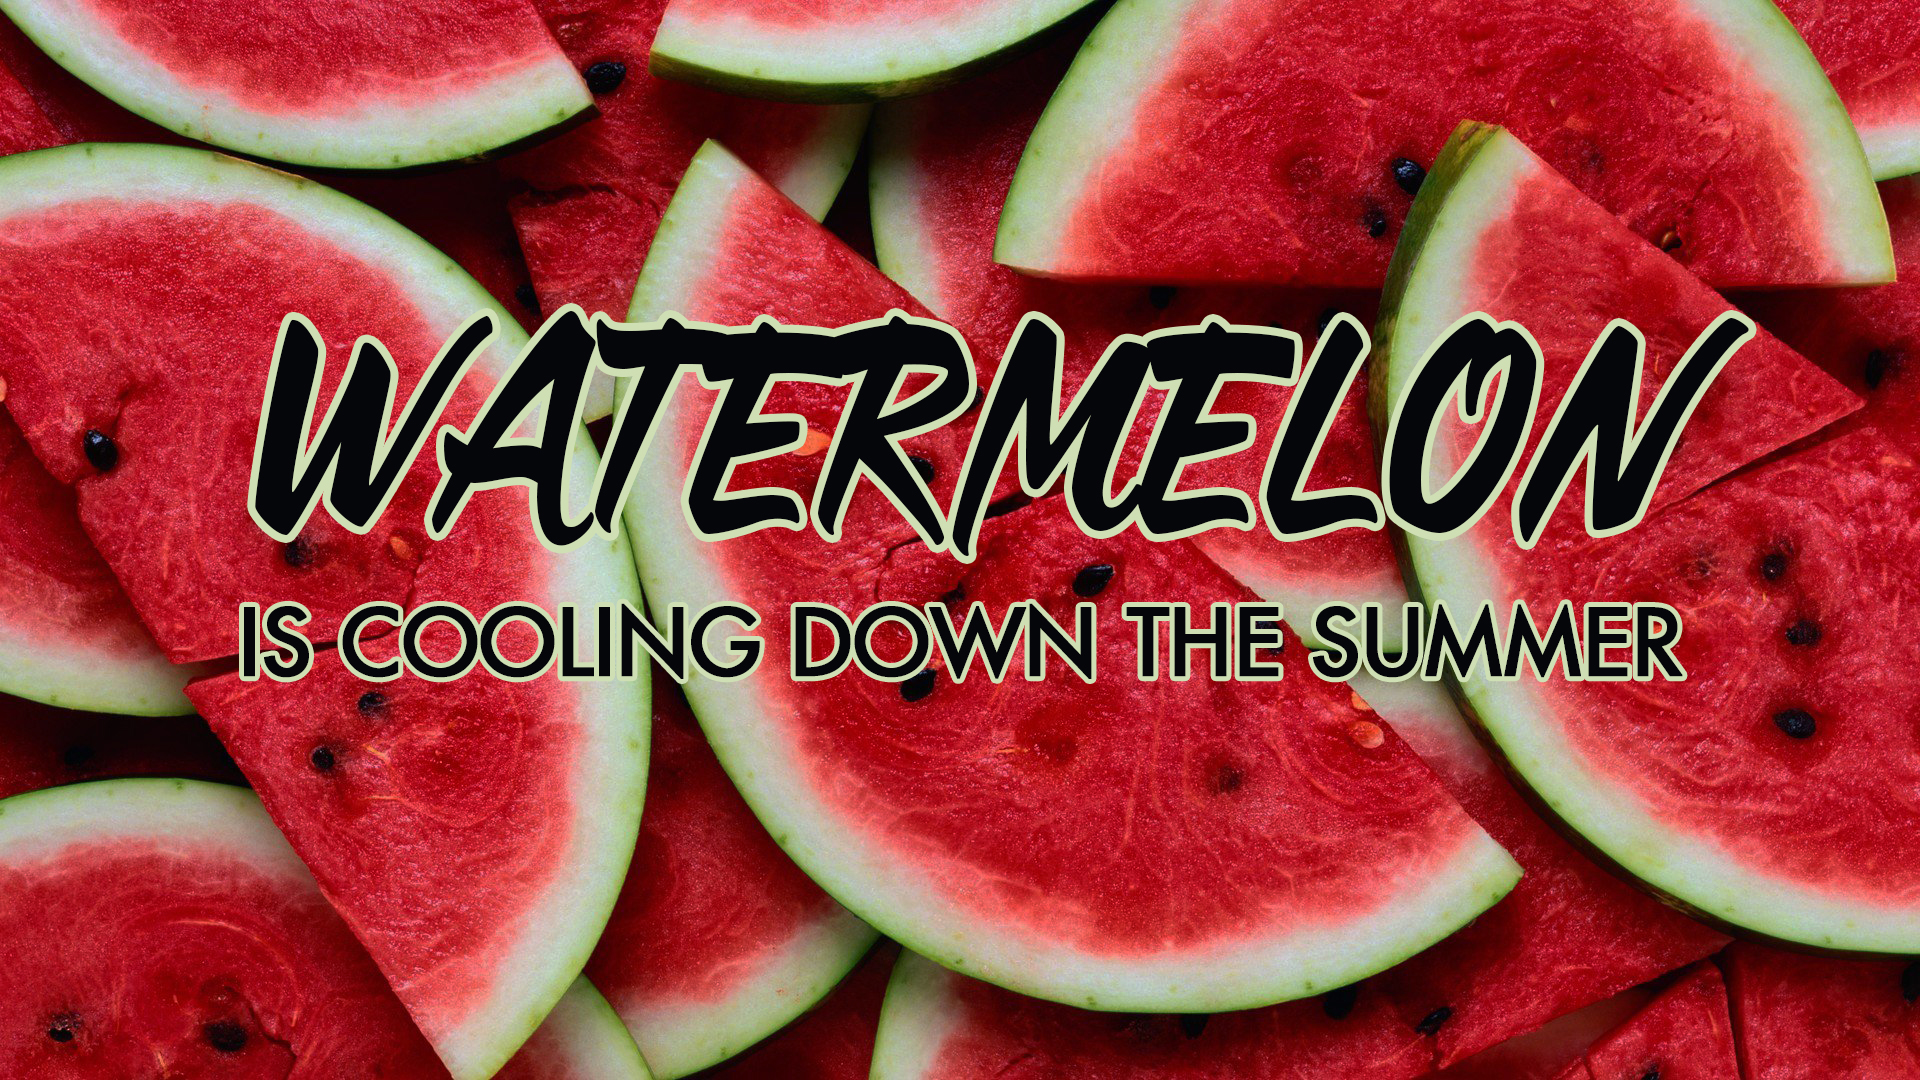 Watermelon is Cooling Down the Summer